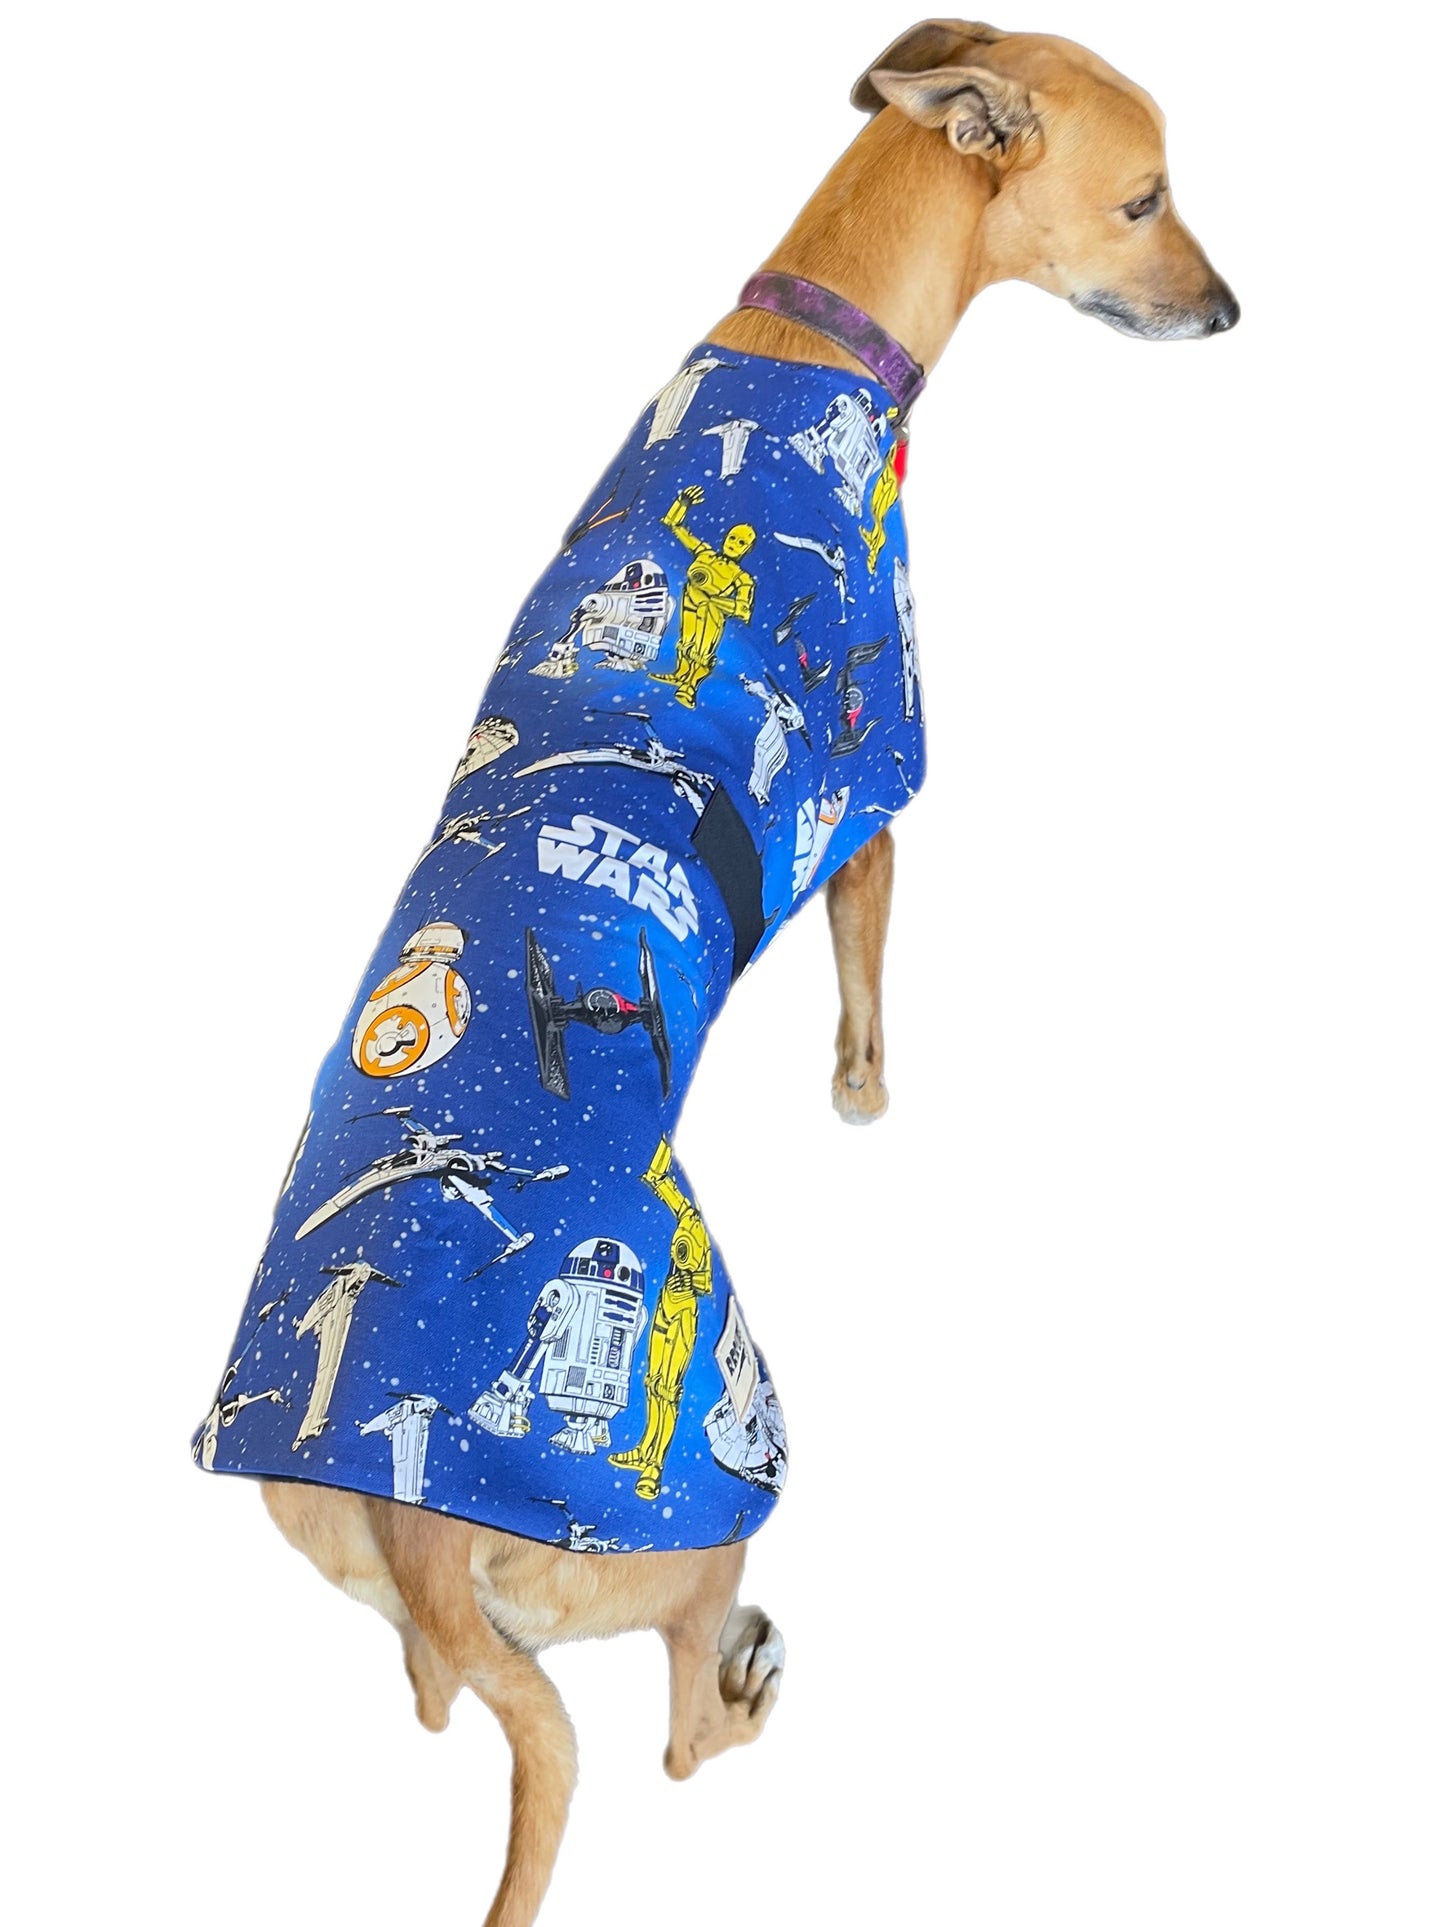 Star Wars Spring classic style Greyhound coat design in a sturdy cotton & lush fleece washable